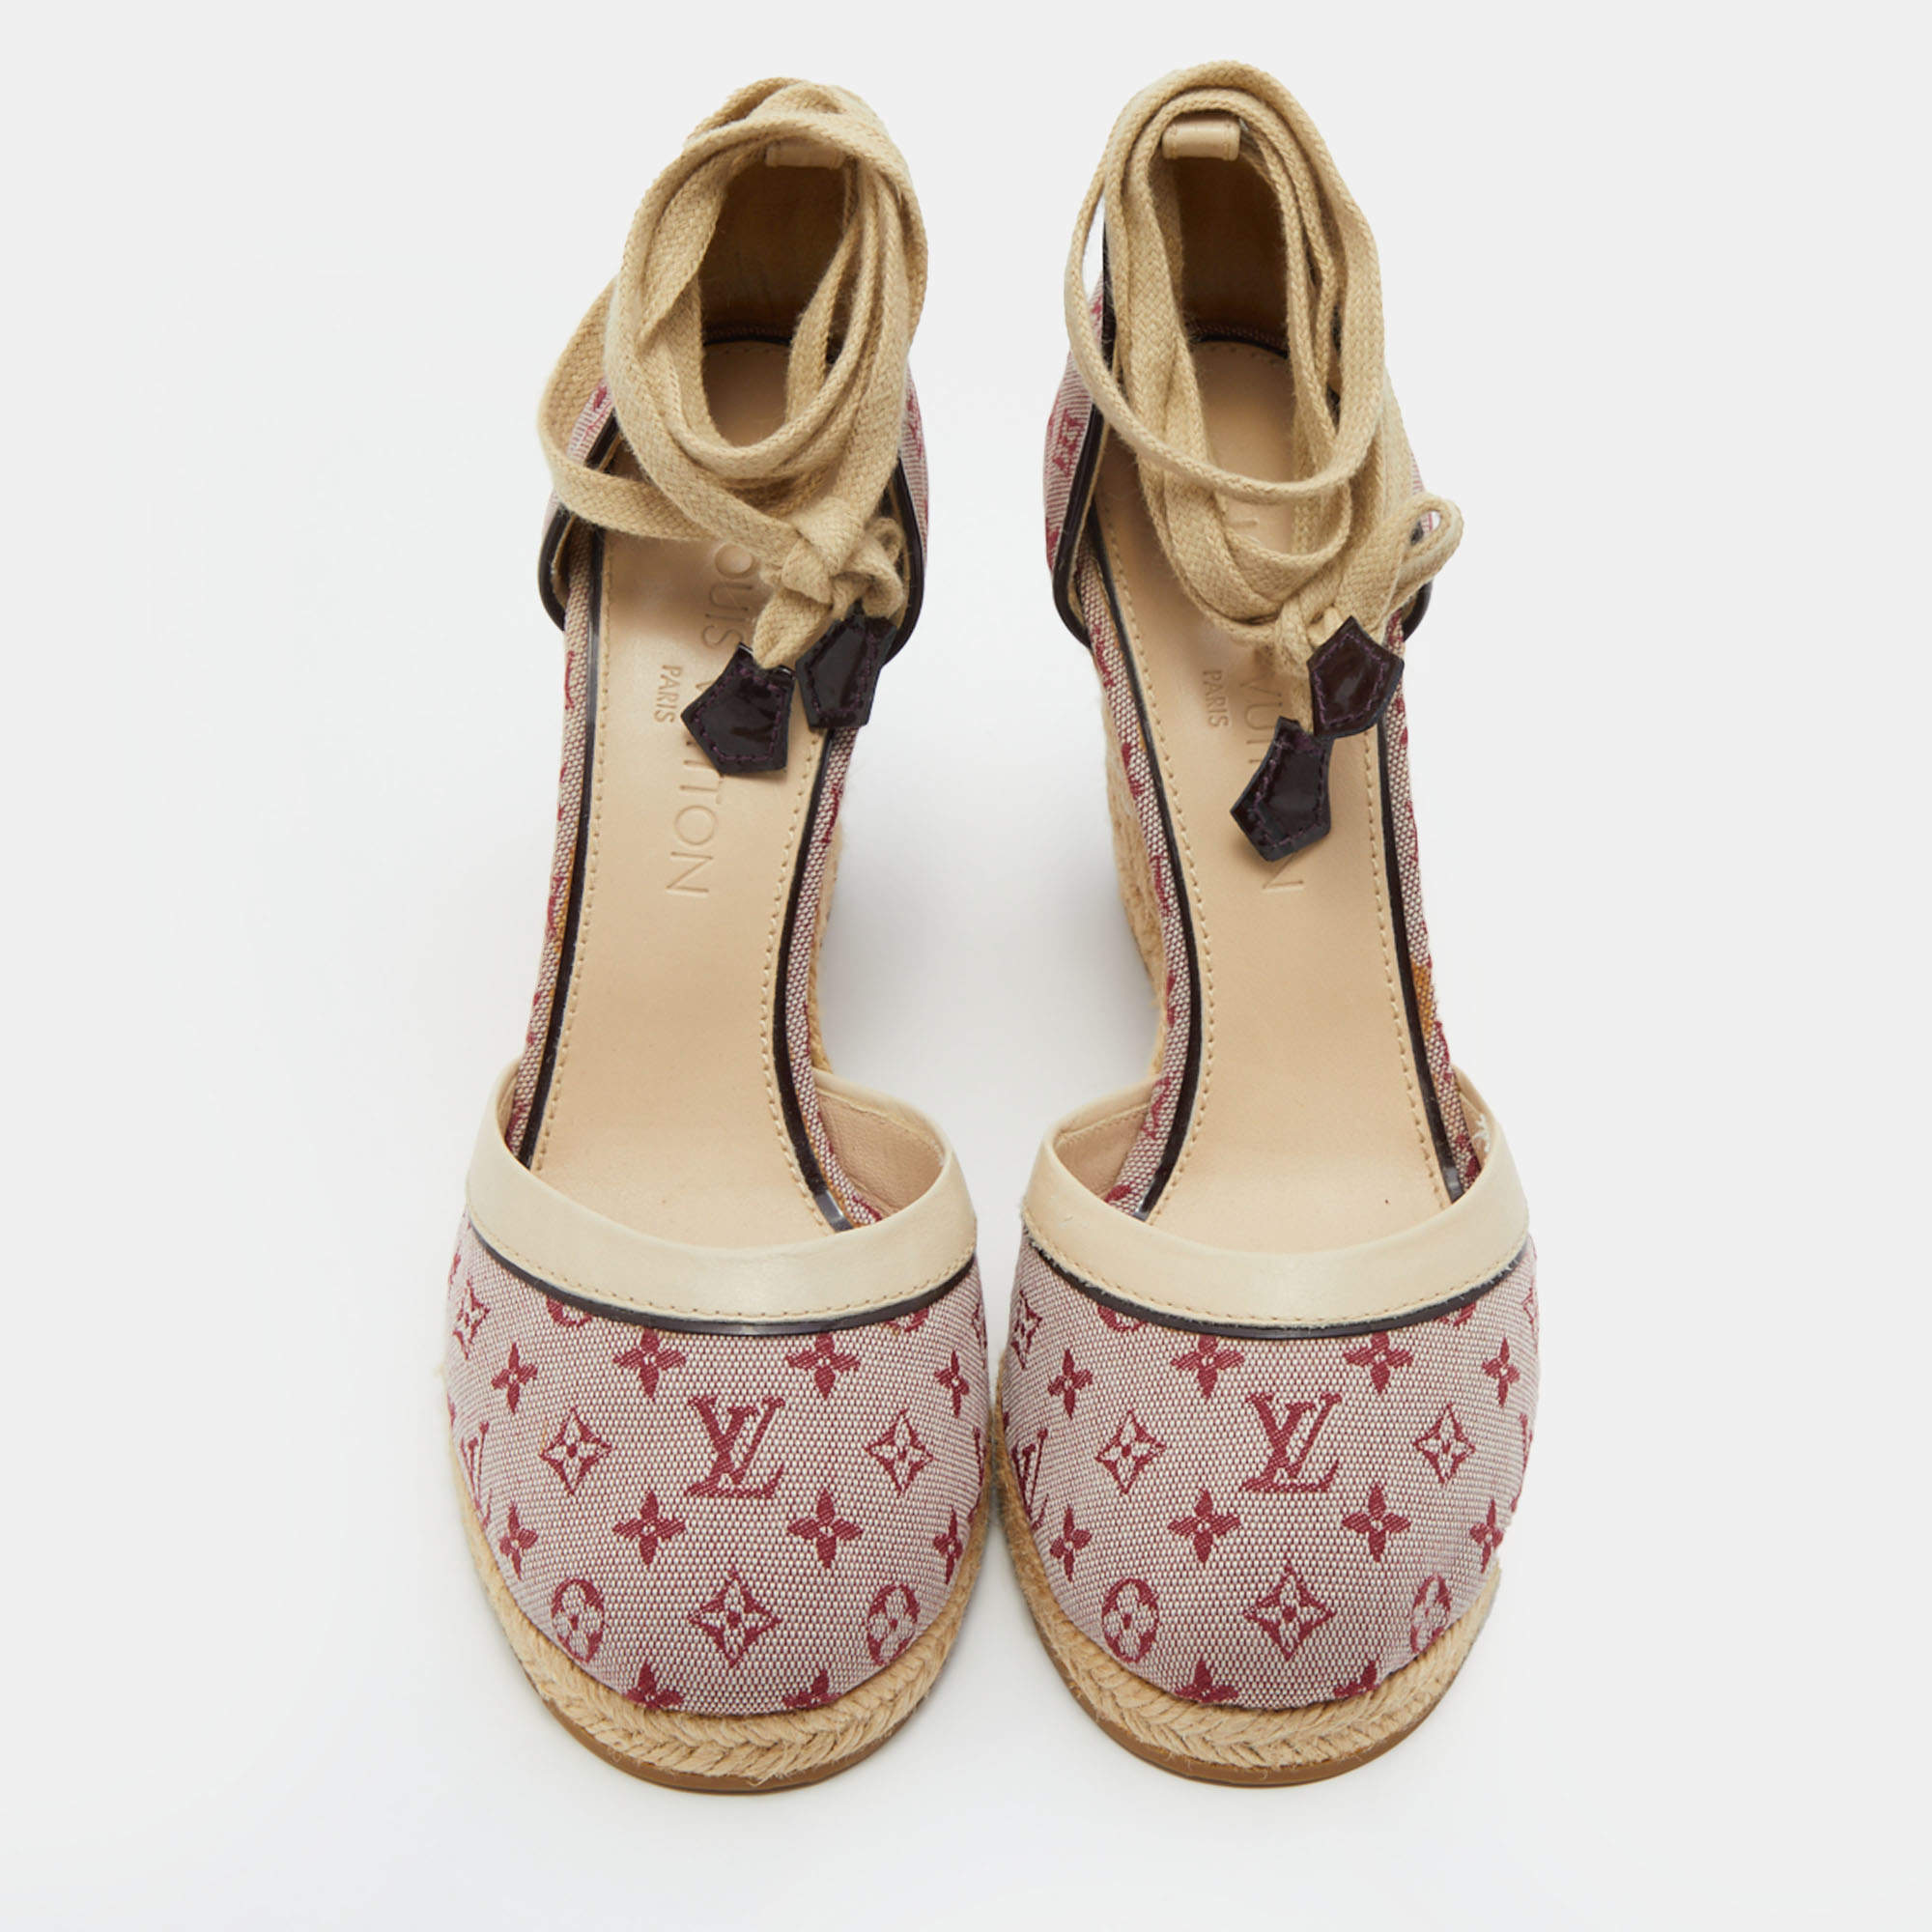 Louis Vuitton Pink Monogram Canvas and Leather Starboard Espadrille Wedge  Pumps Size 38 Louis Vuitton